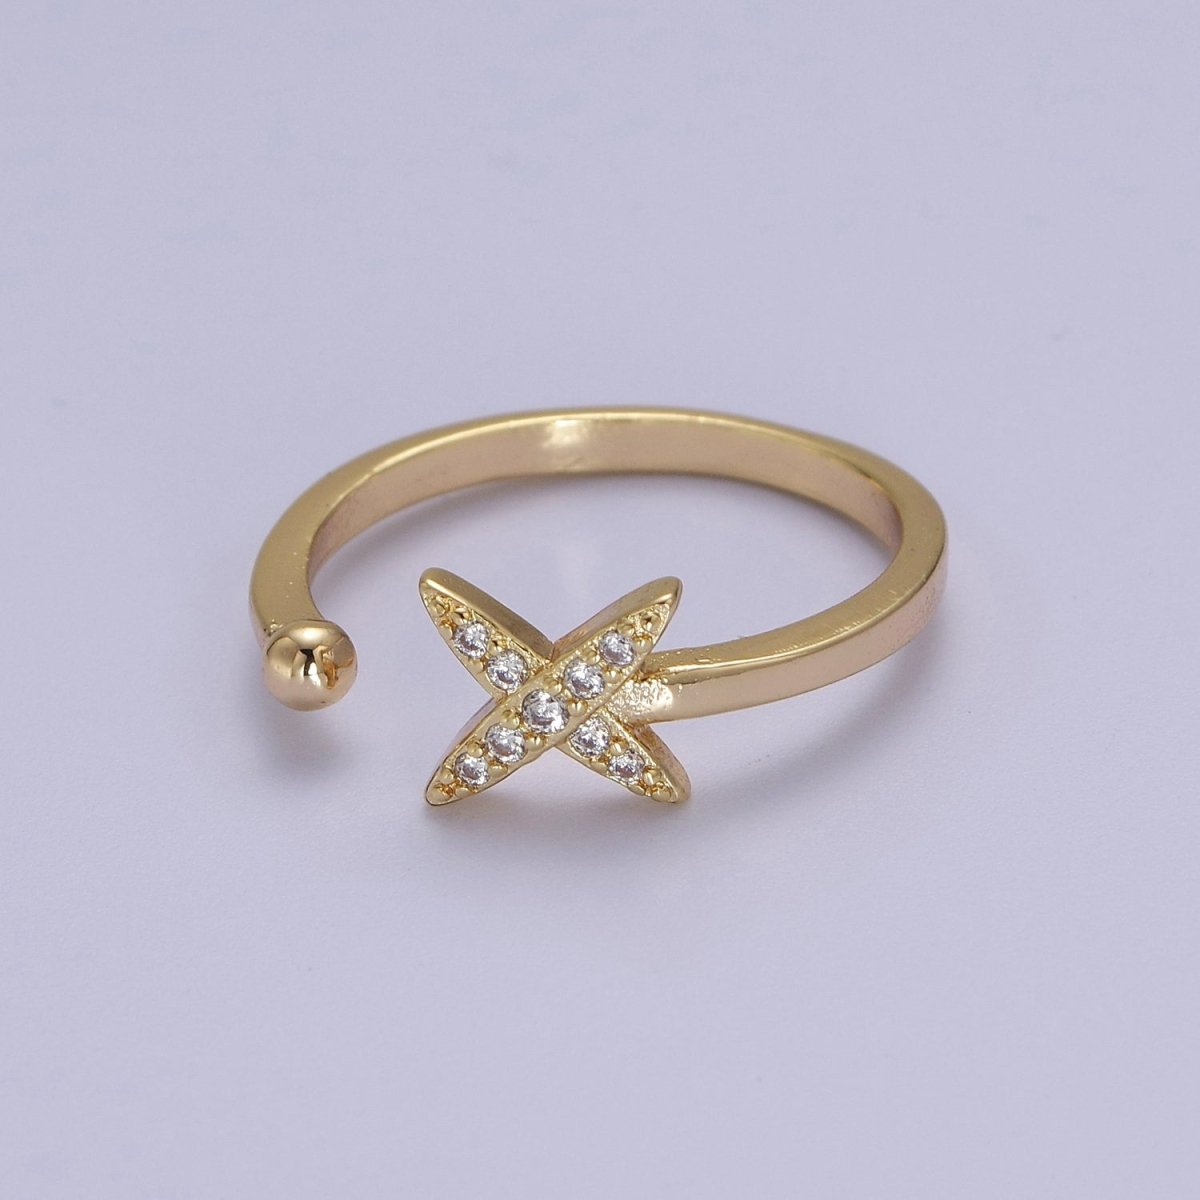 Dainty Star Ring - Minimalist Ring - Celestial Jewelry Stacking Rings Thin Gold Filled Band Ring Open Adjustable Jewelry S-518 - DLUXCA